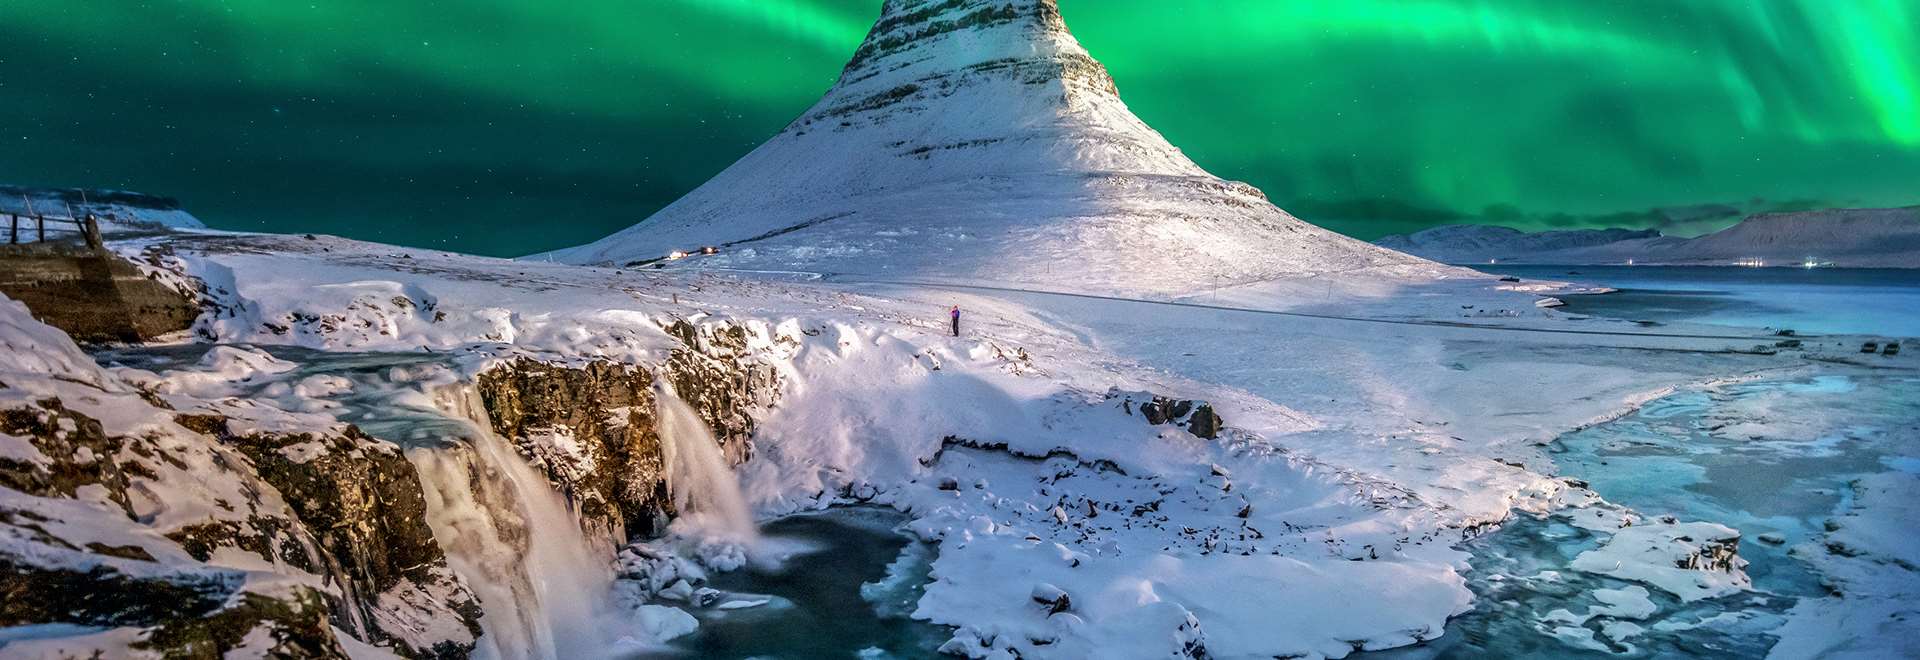 Cheap flights to Iceland from £141 Iceland flights with Netflights